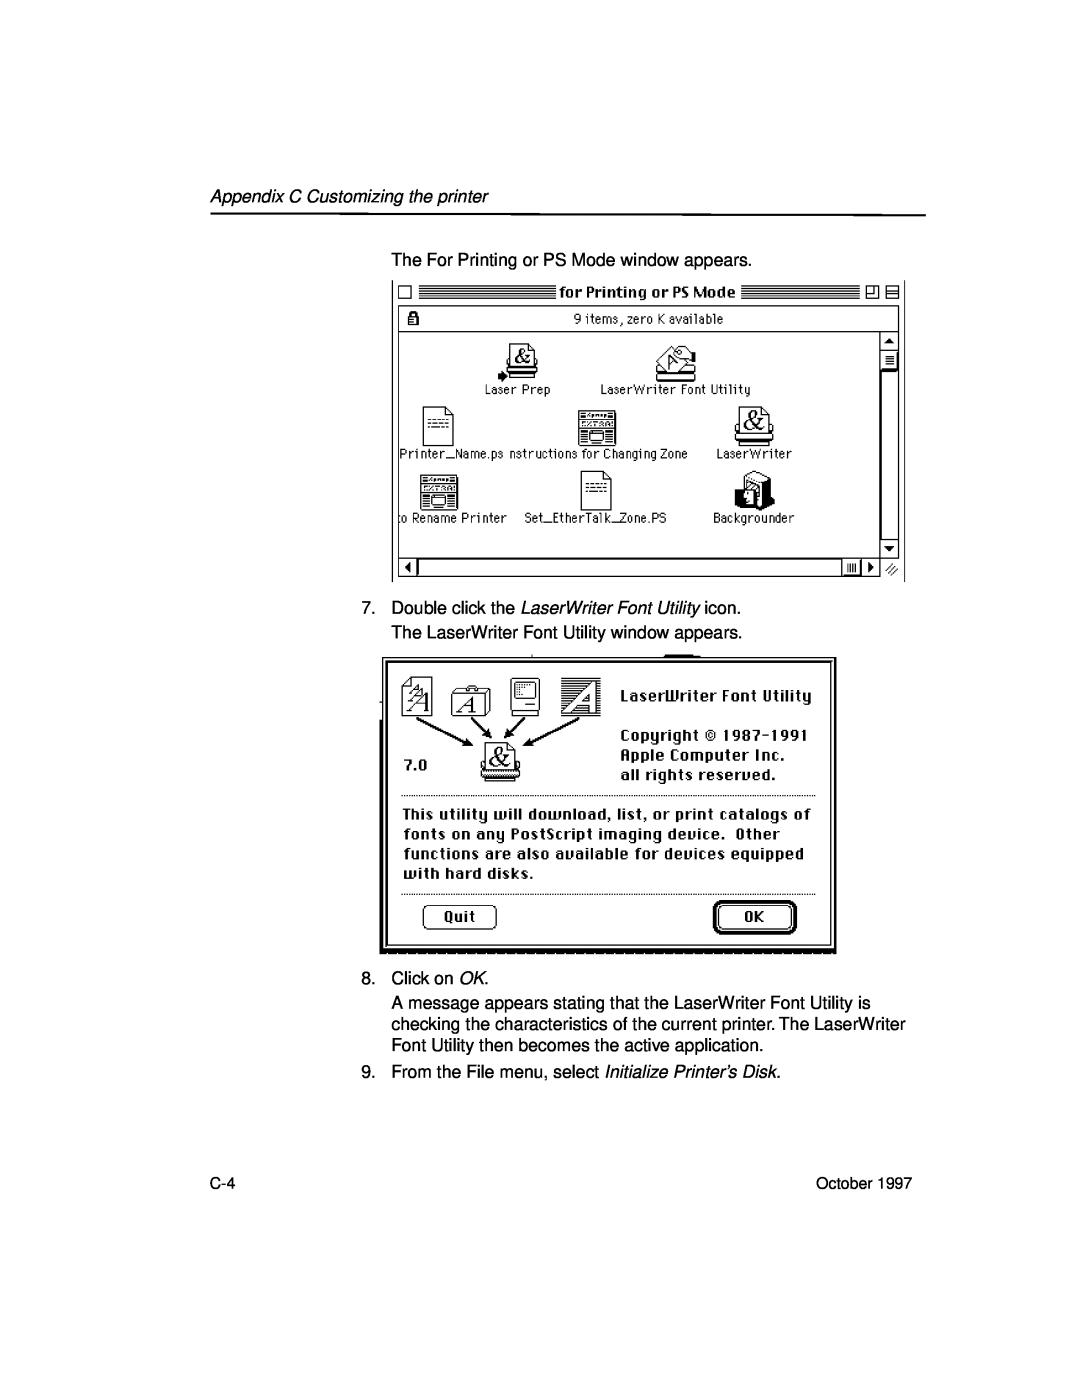 Kodak 8650 manual Appendix C Customizing the printer, The For Printing or PS Mode window appears 